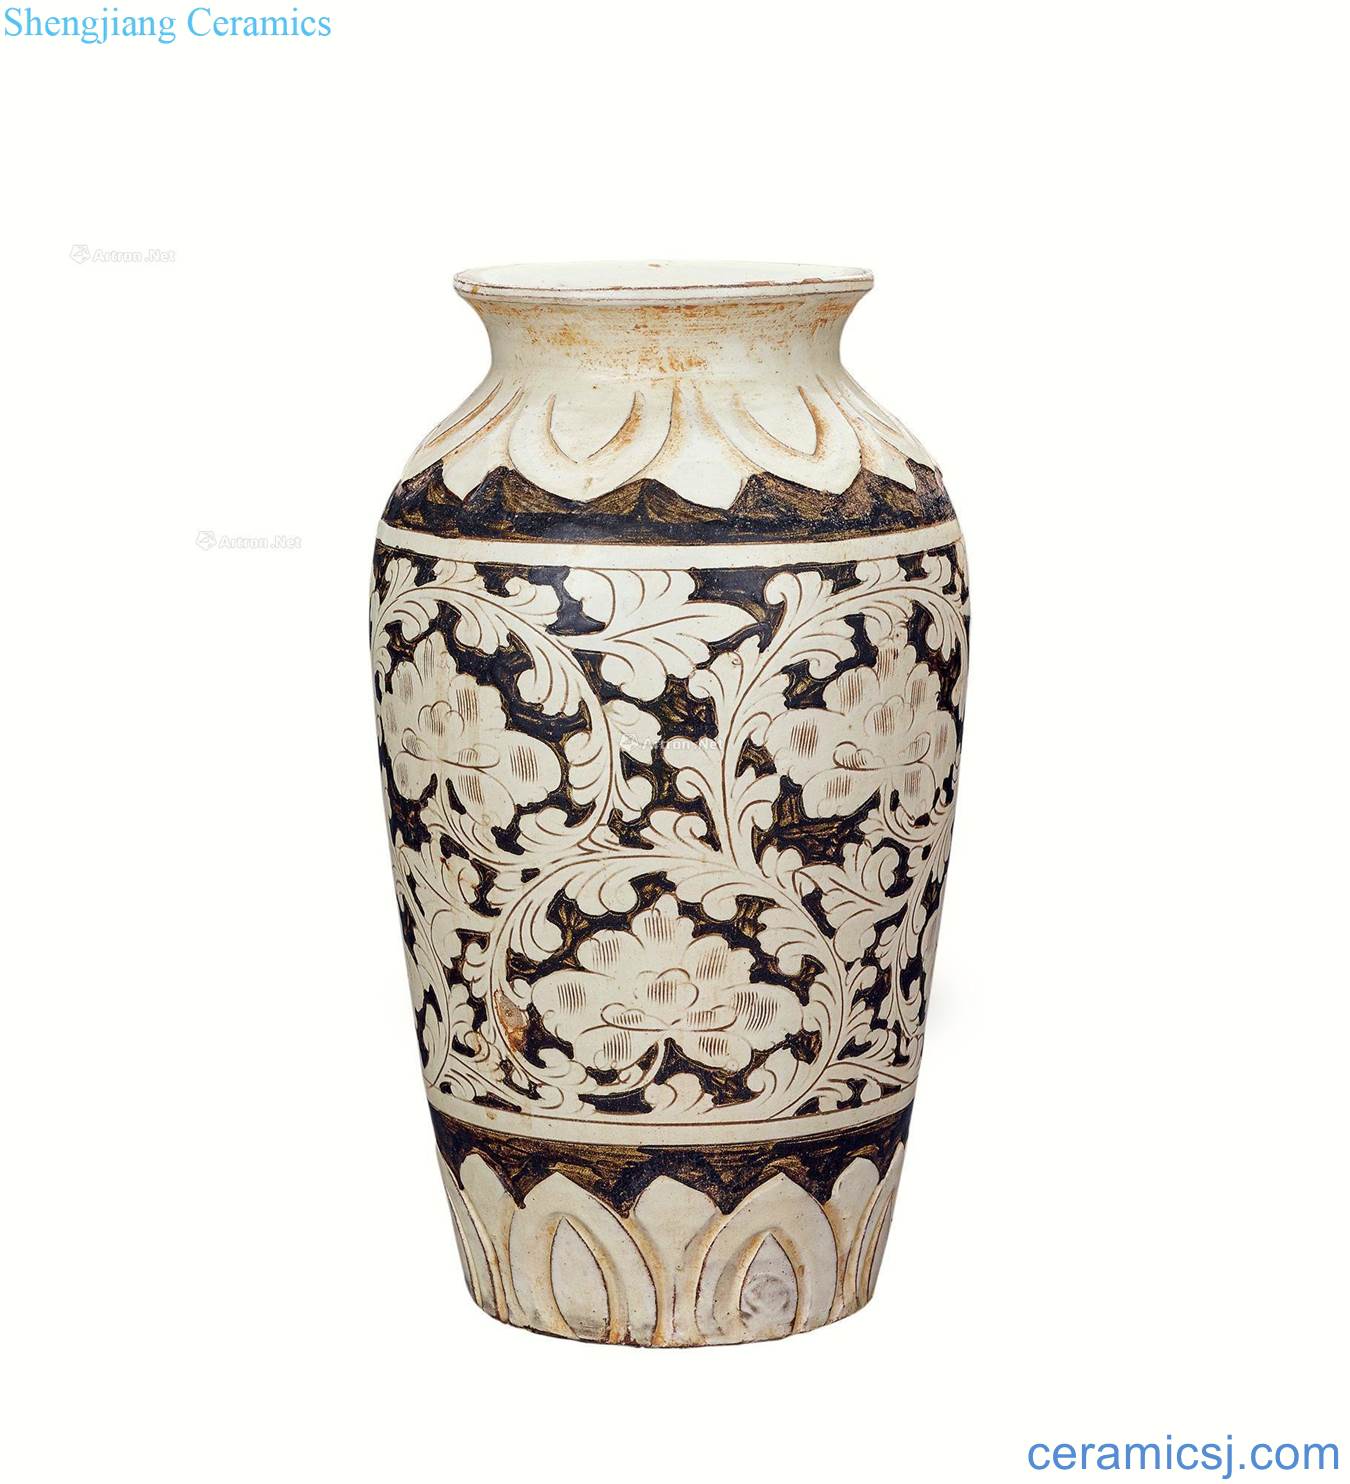 The song dynasty vase magnetic state kiln is described